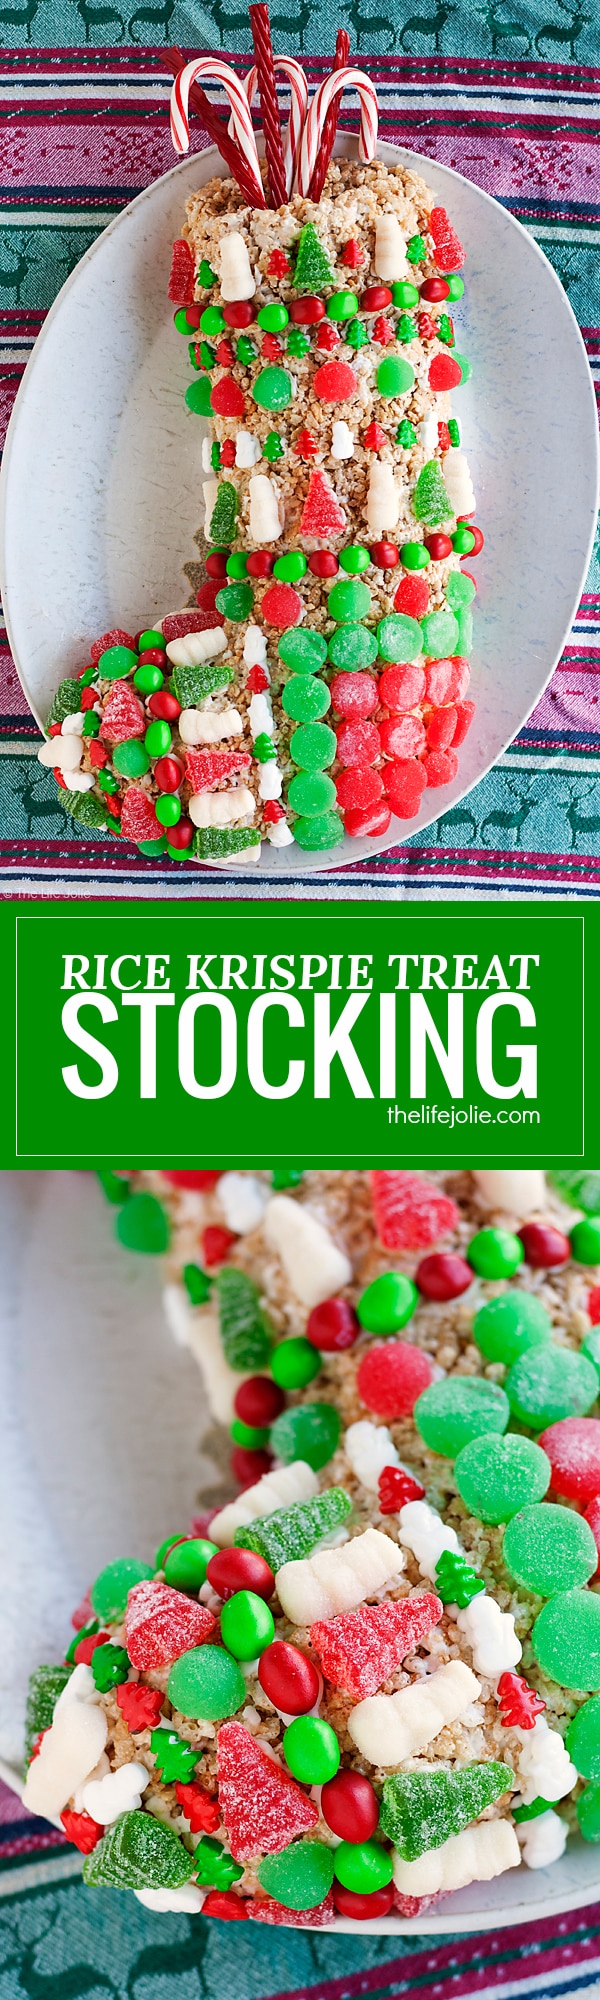 This Rice Krispie Treat Stocking recipe is an easy Christmas dessert option for both kids and adults! It was simple to make and decorate and is meant to be made ahead. This is a fun project for the whole family to make during the holidays and is a great Gingerbread House alternative.